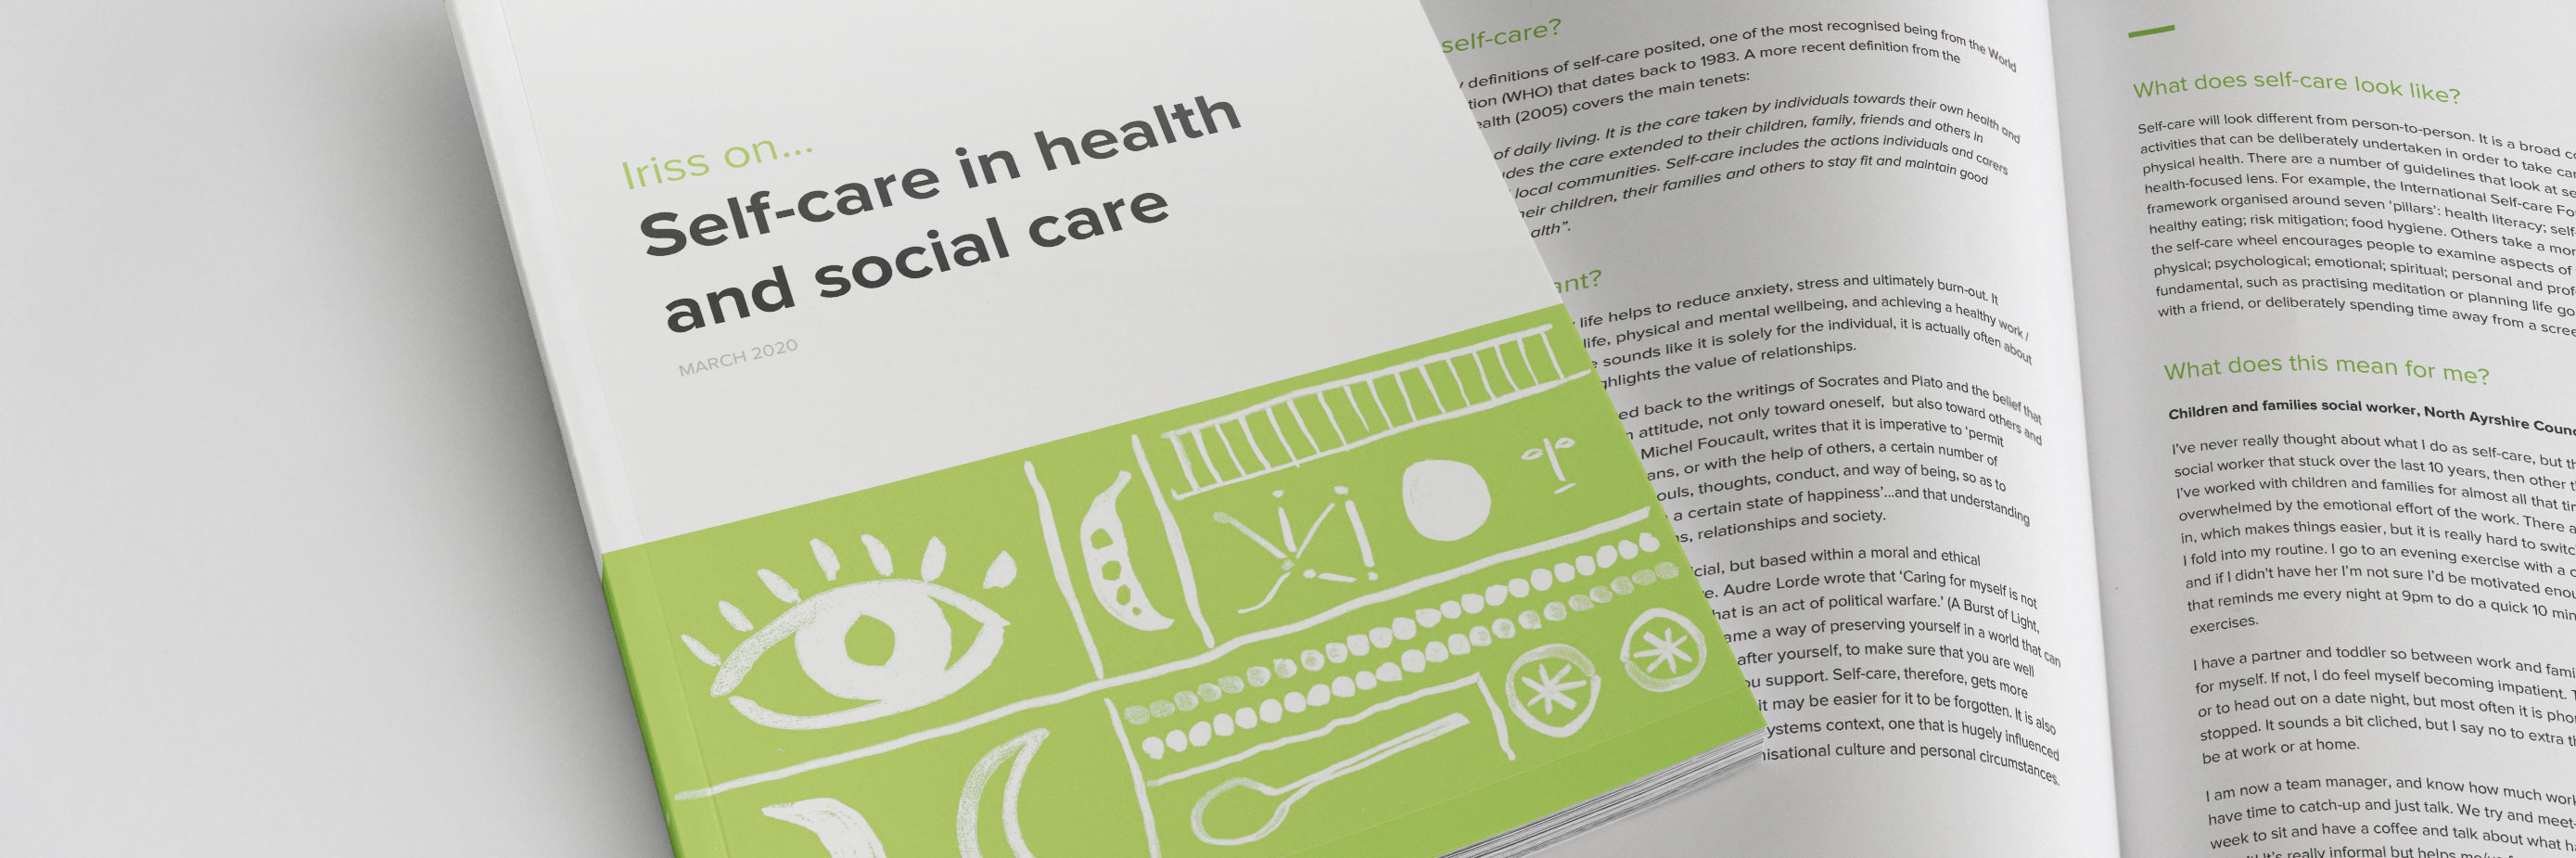 Self-care in health and social services